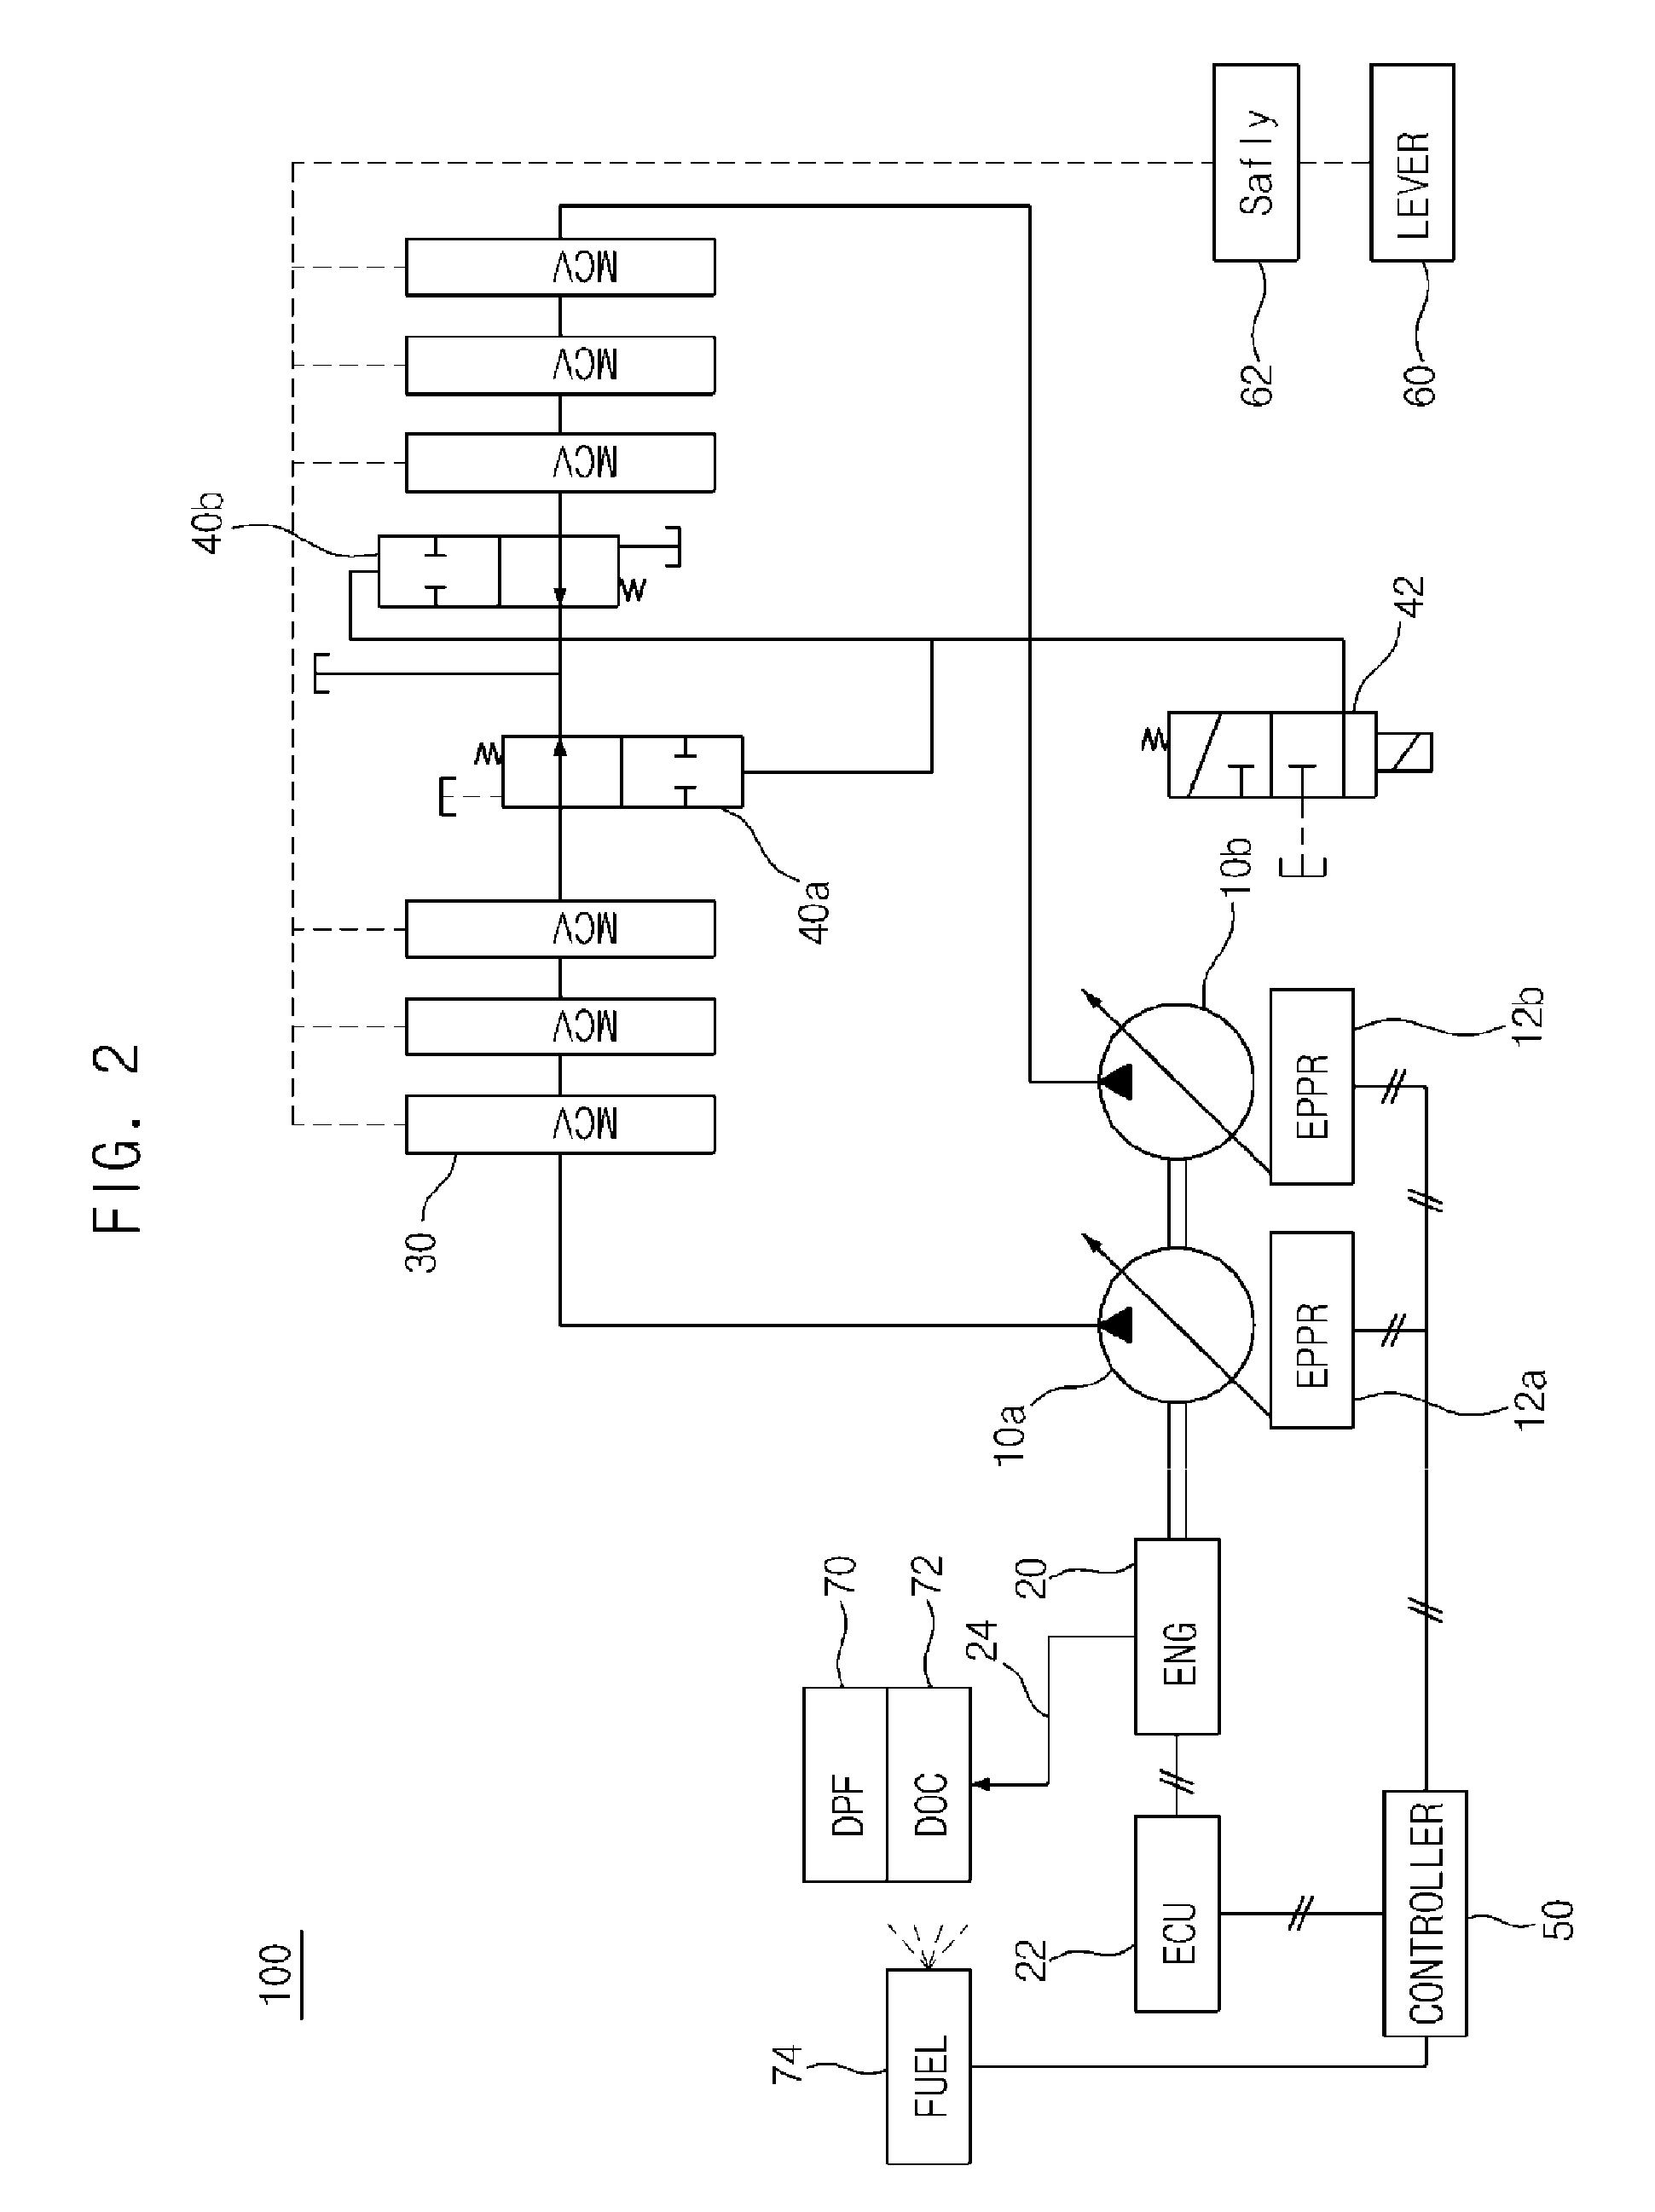 System and method for active regeneration of a DPF of a construction machine having an electro-hydraulic pump